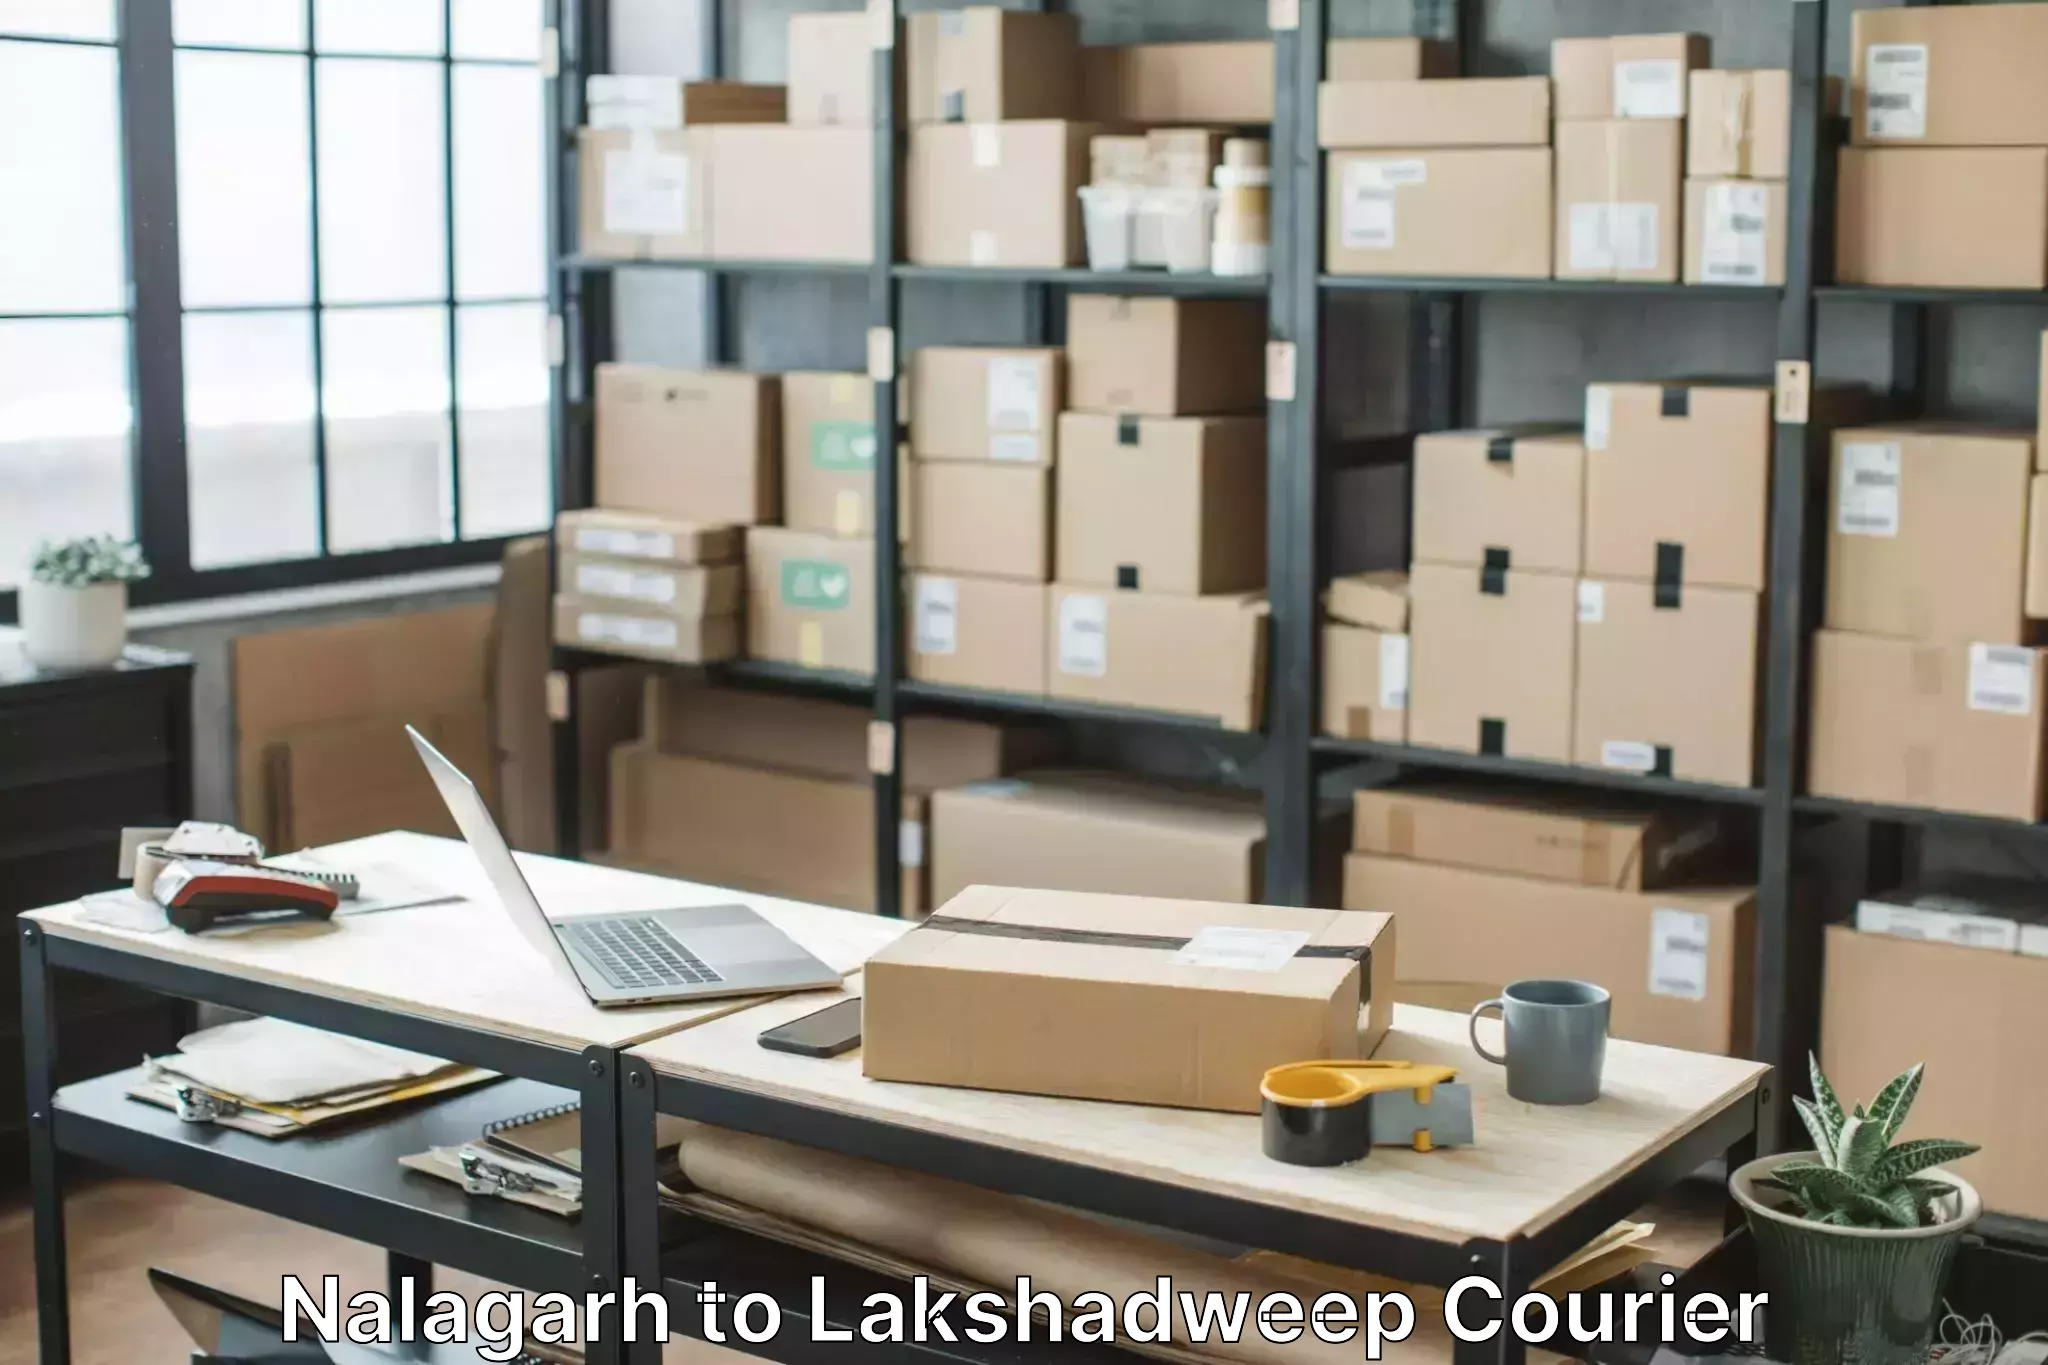 Professional movers and packers Nalagarh to Lakshadweep